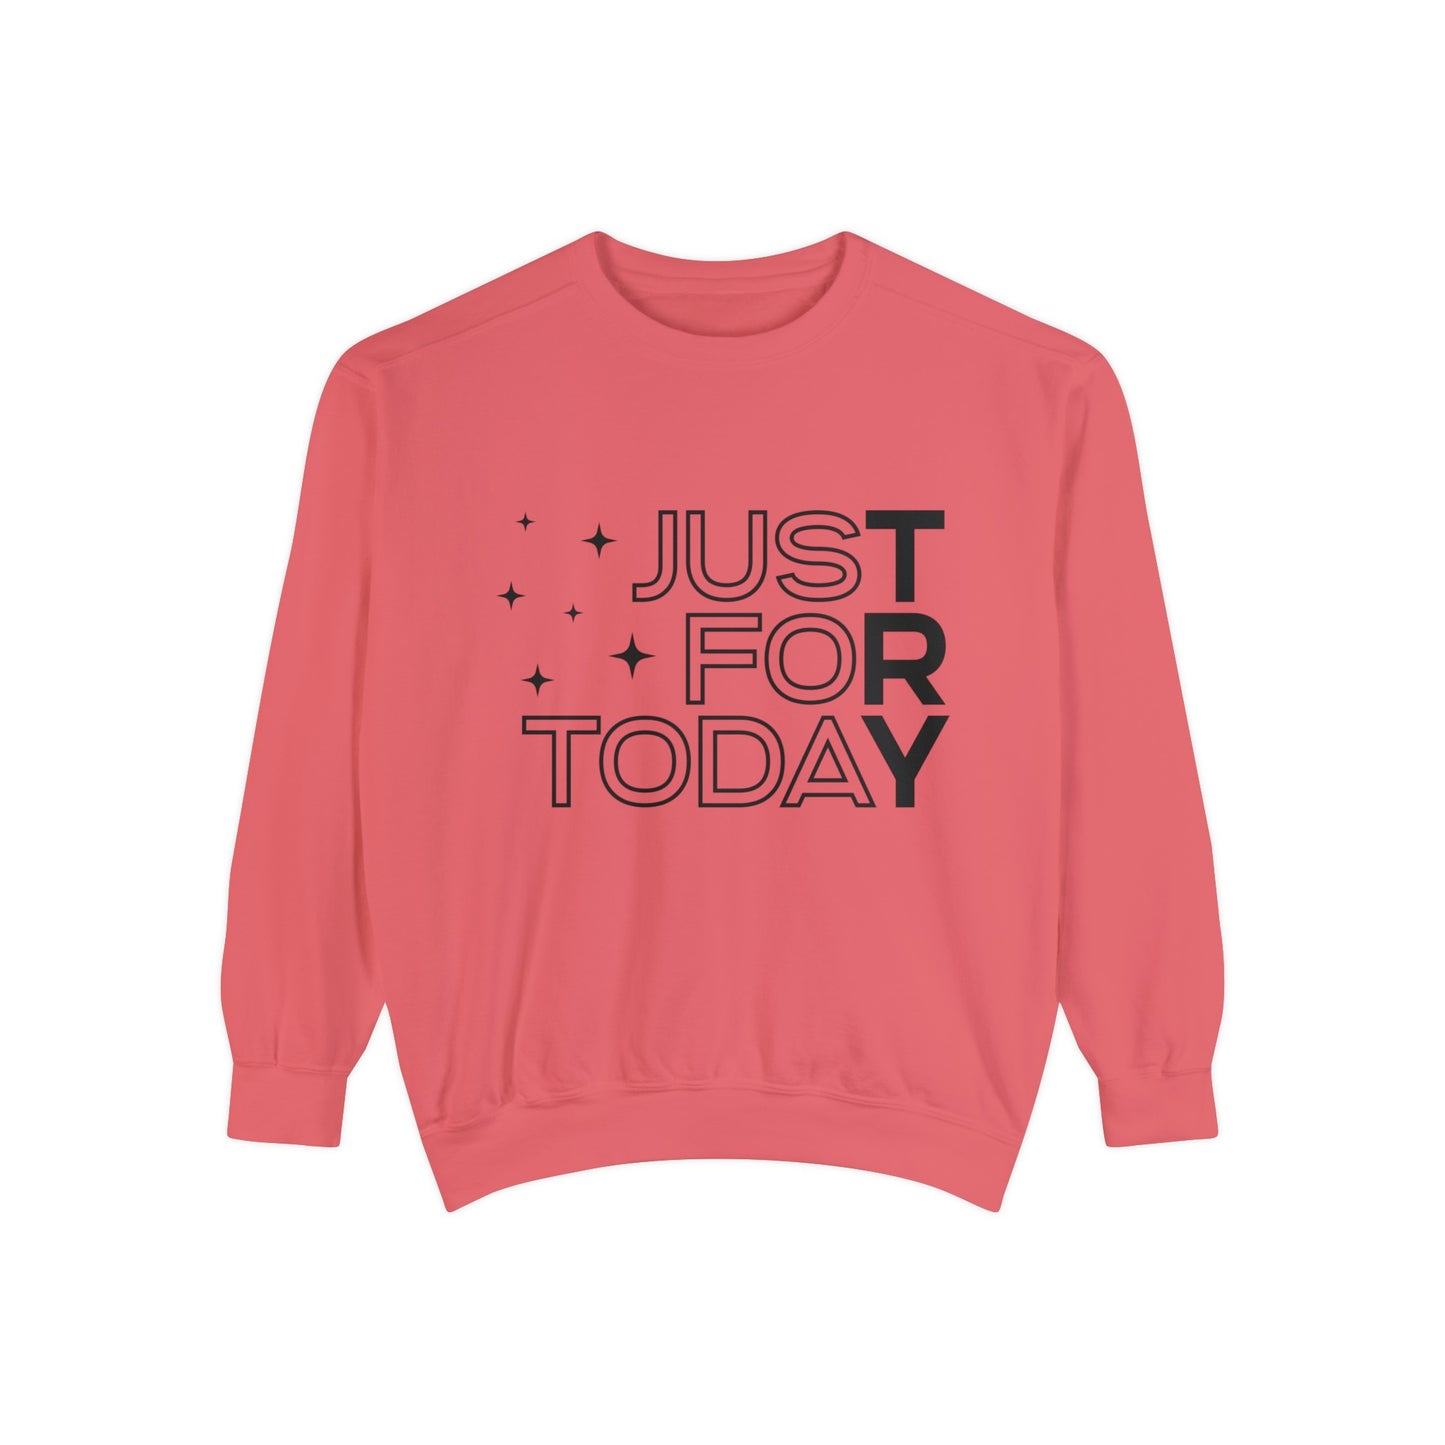 Just For Today Unisex Garment-Dyed Sweatshirt